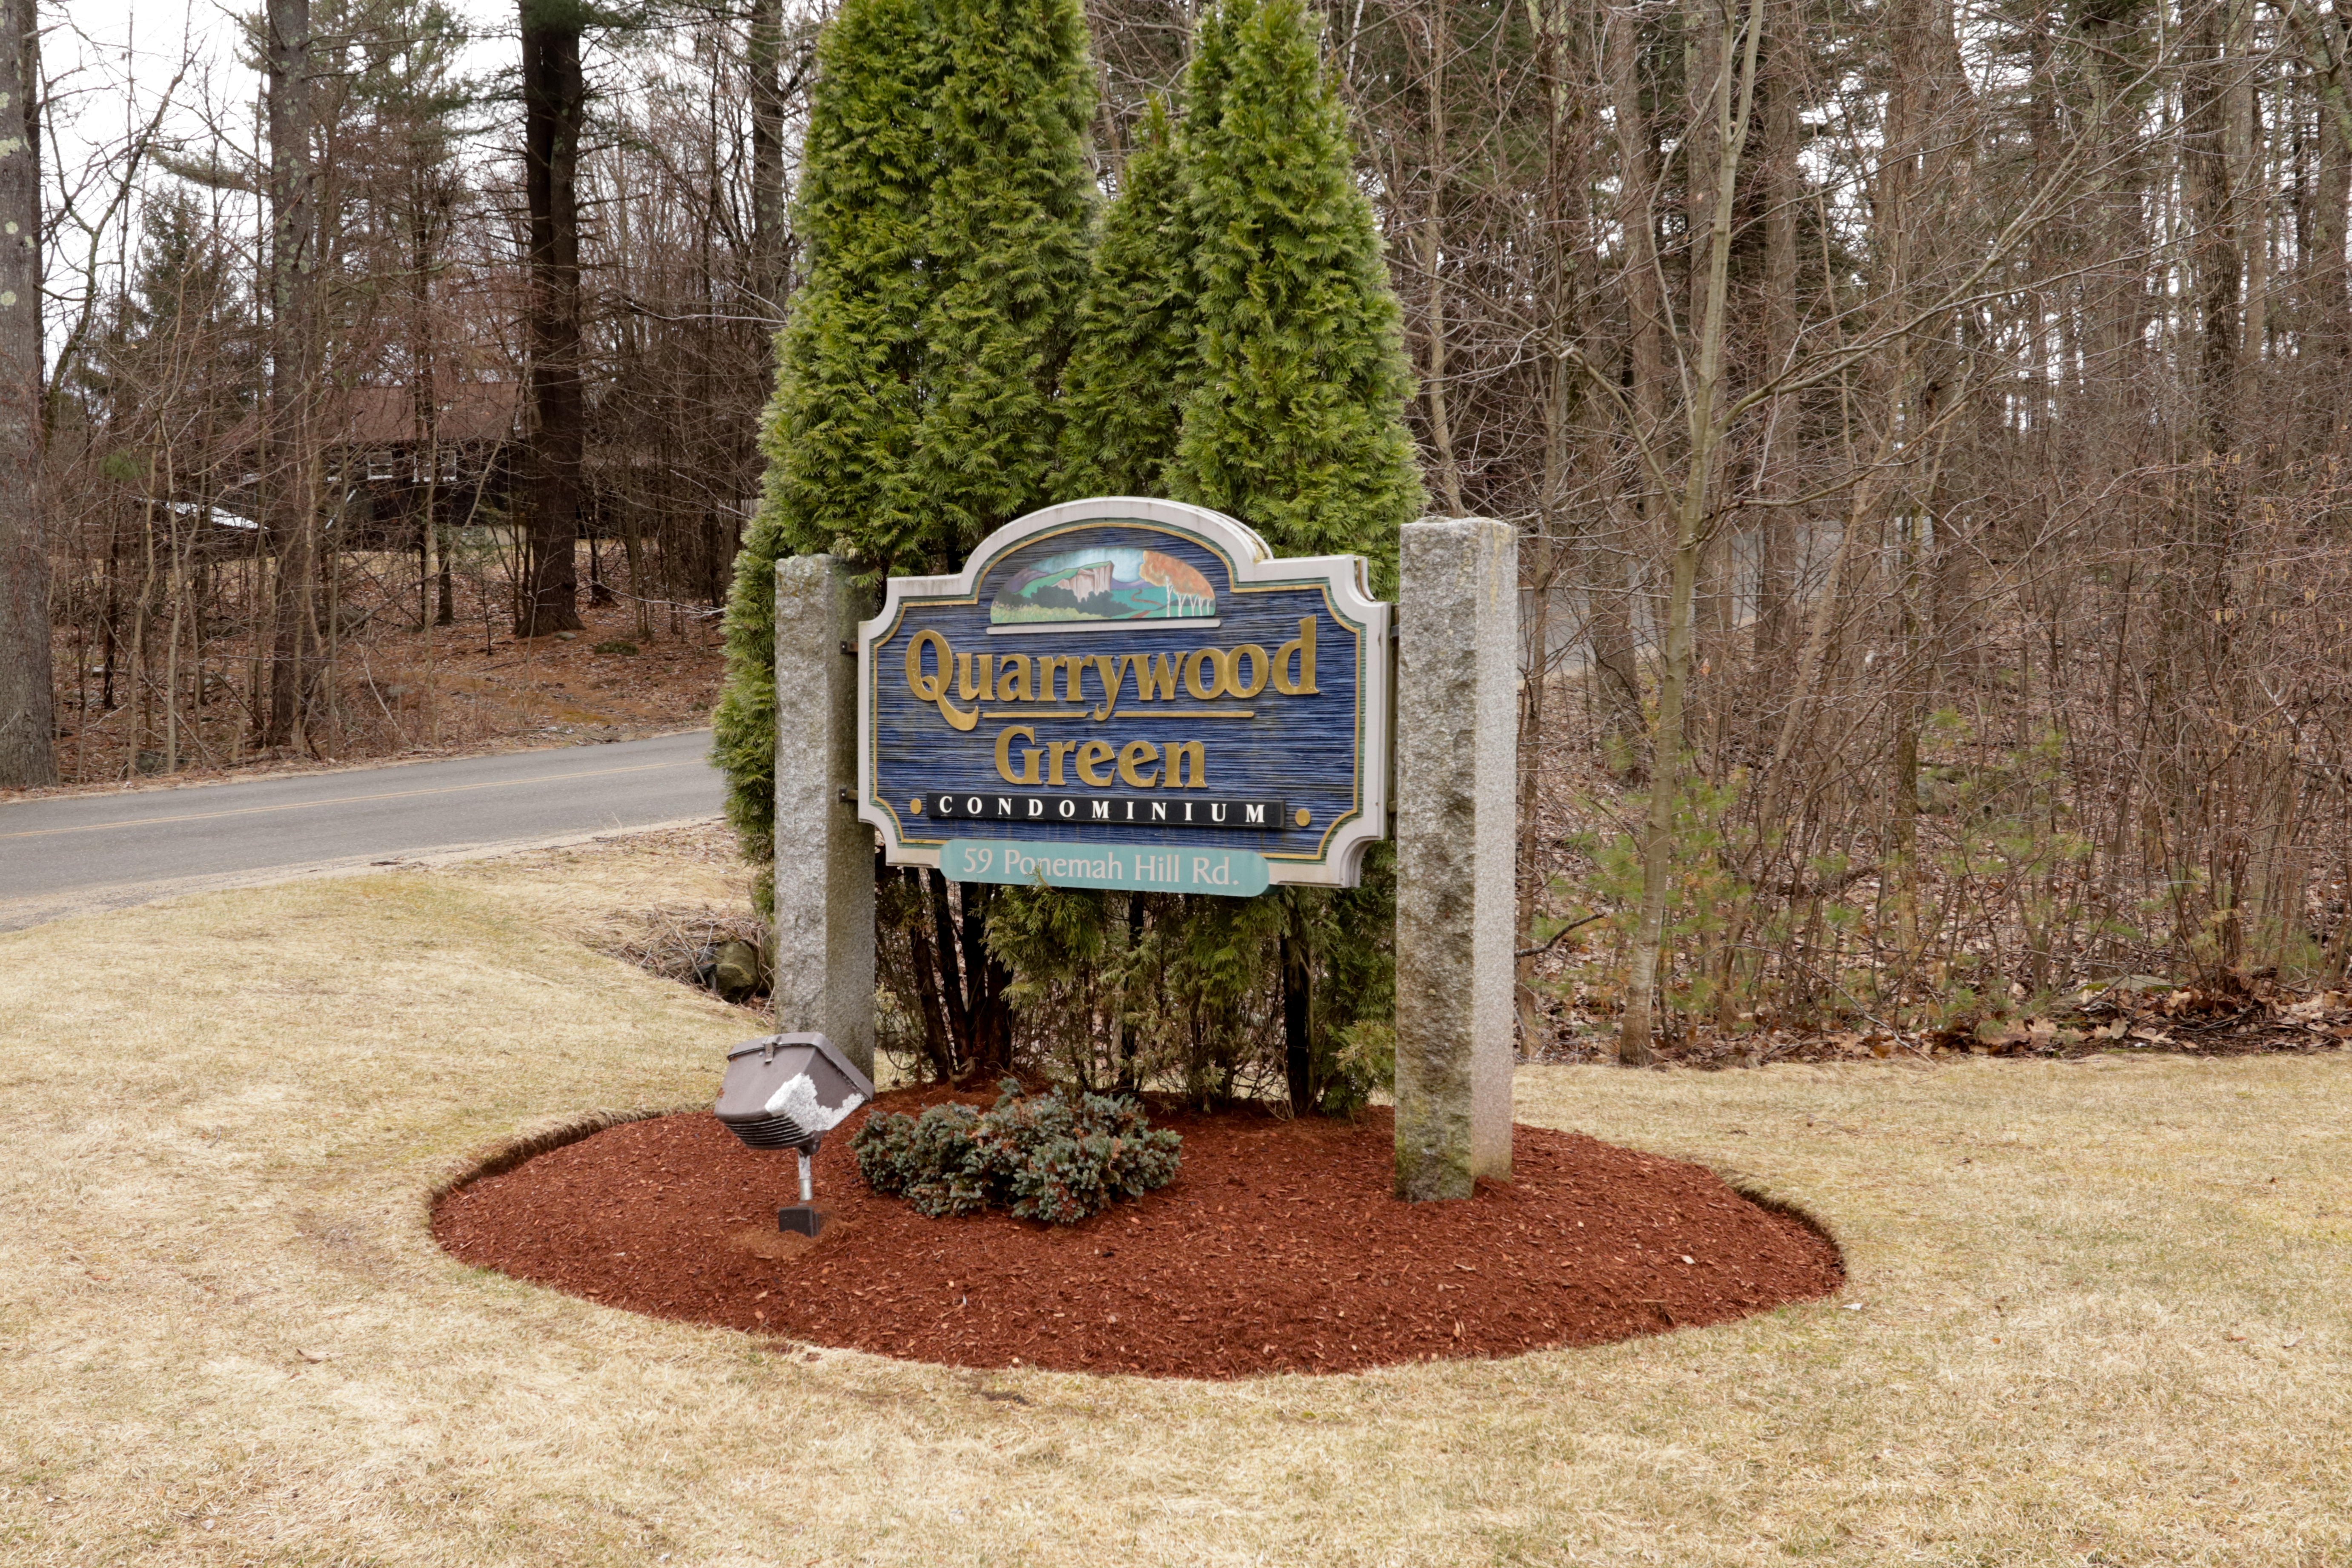 Milford condo for sale at Quarrywood Green 59 Ponemah Hill Rd Apt 2-LL2 Milford NH 03055 Quarrywood Green Condominiums